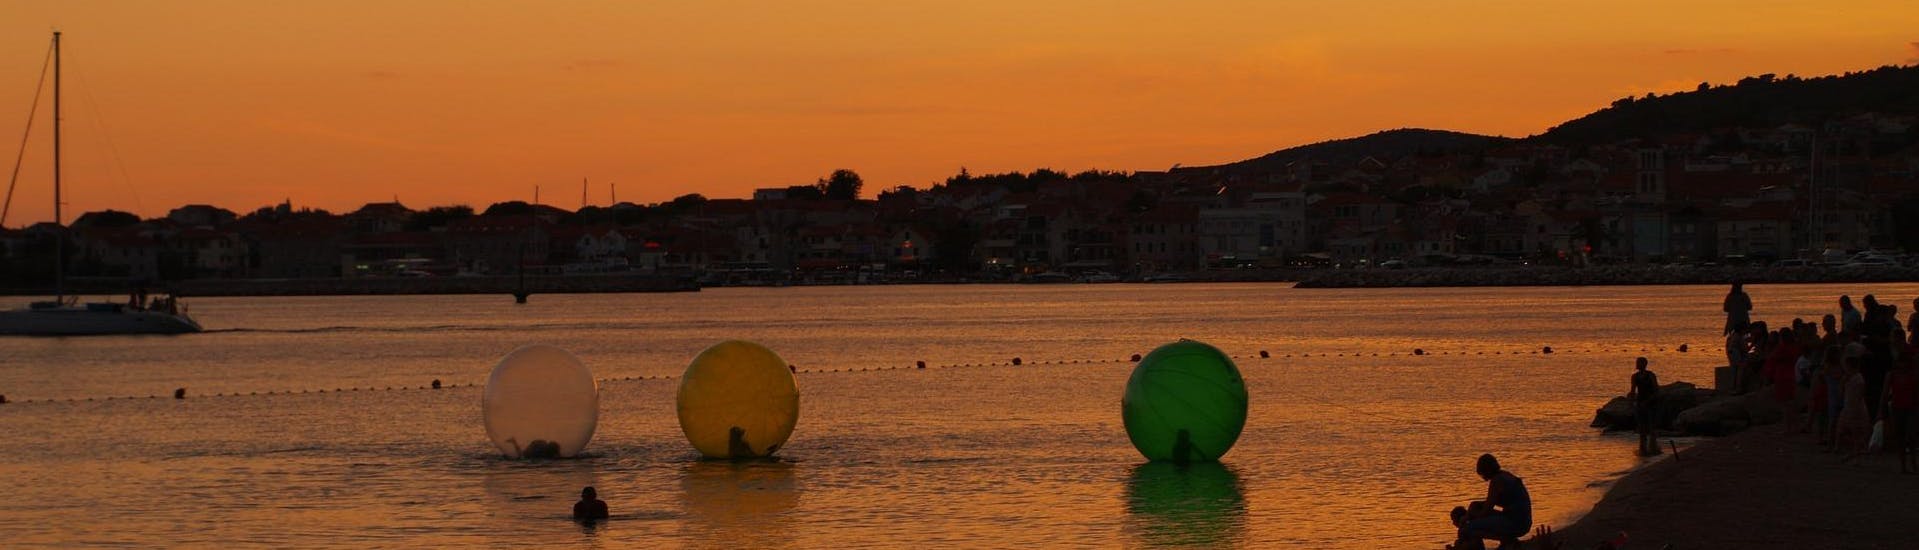 Picture of the coast of Vodice in Croatia at sunset.